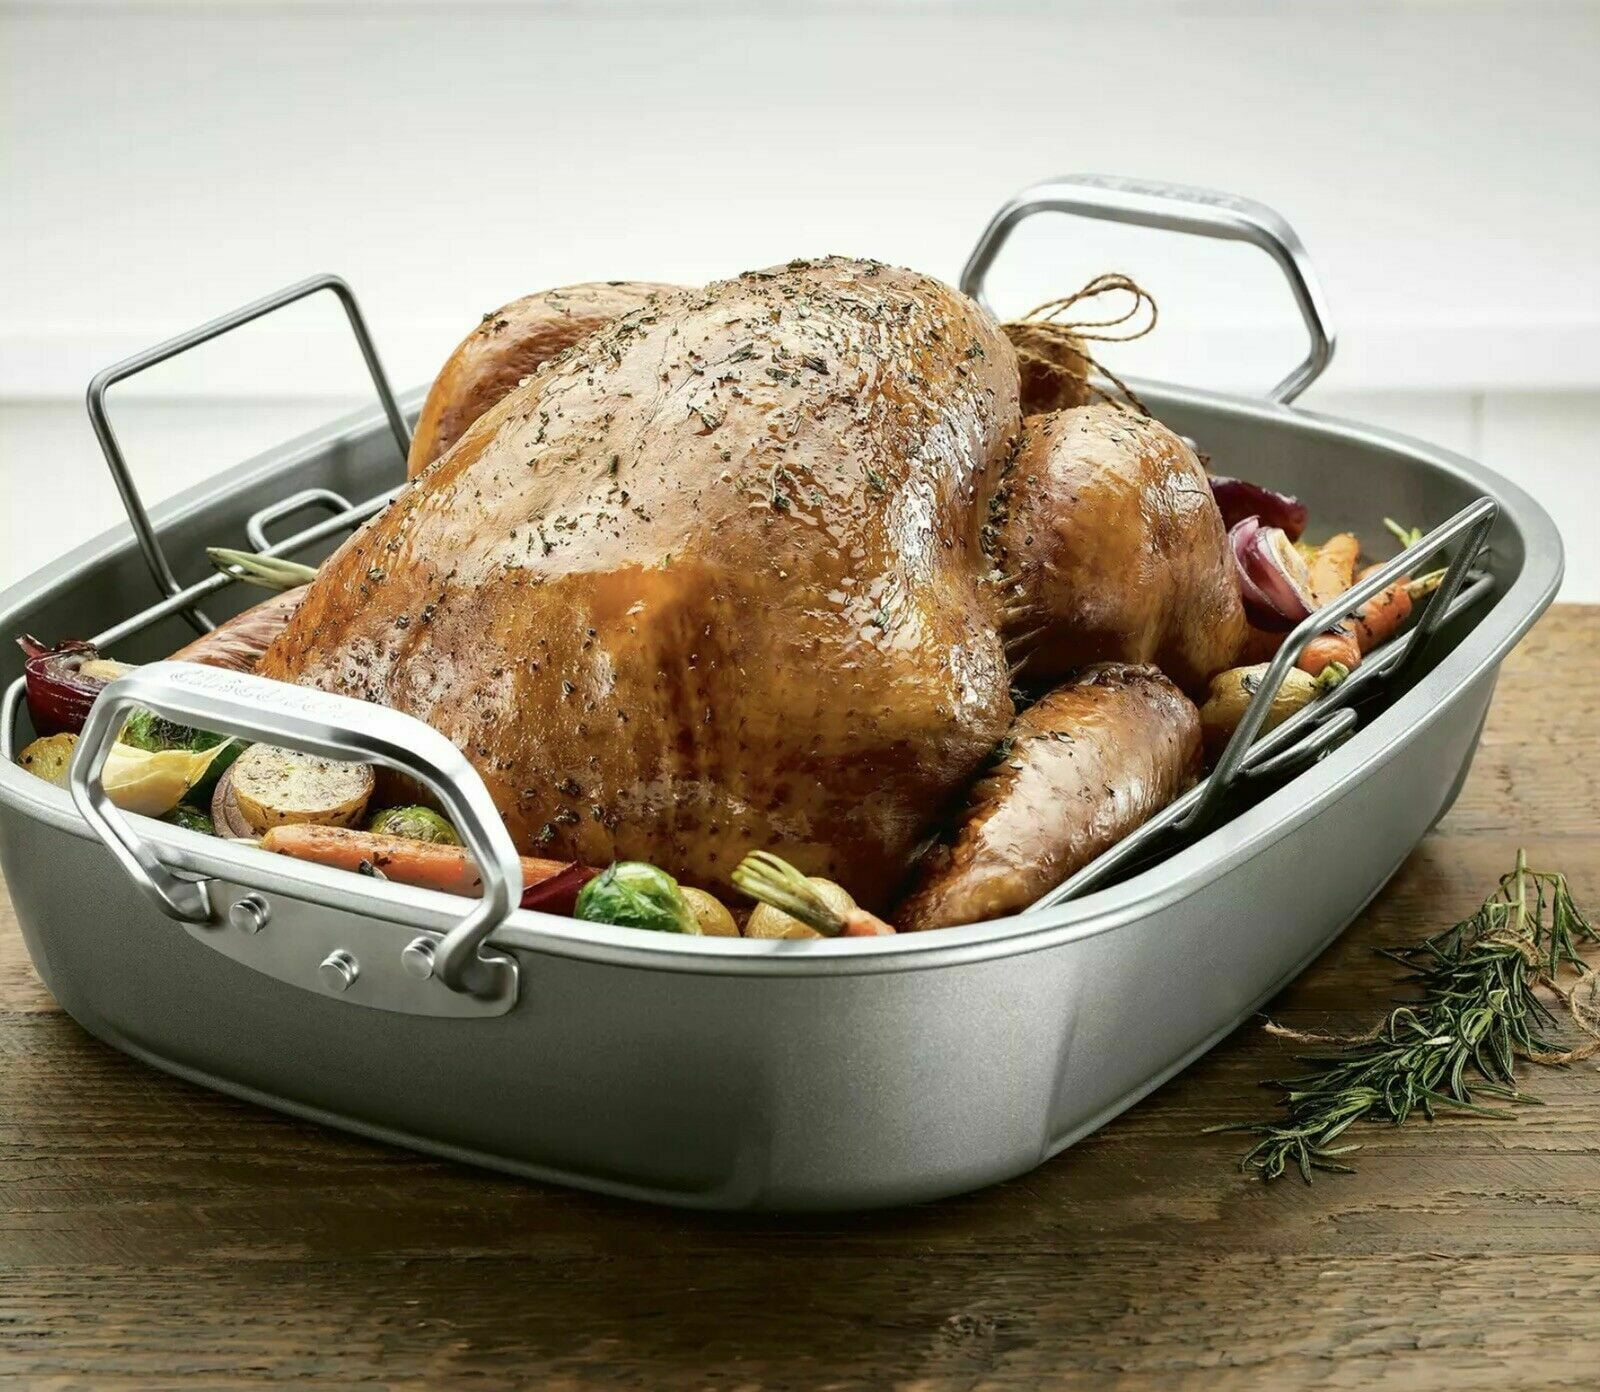 KITESSENSU Nonstick Roasting Pan with Lid - Large Turkey Roaster with Rack  16 x 12 Inch - Heavy Duty Covered Roasting Pot for Oven, Dishwasher Safe